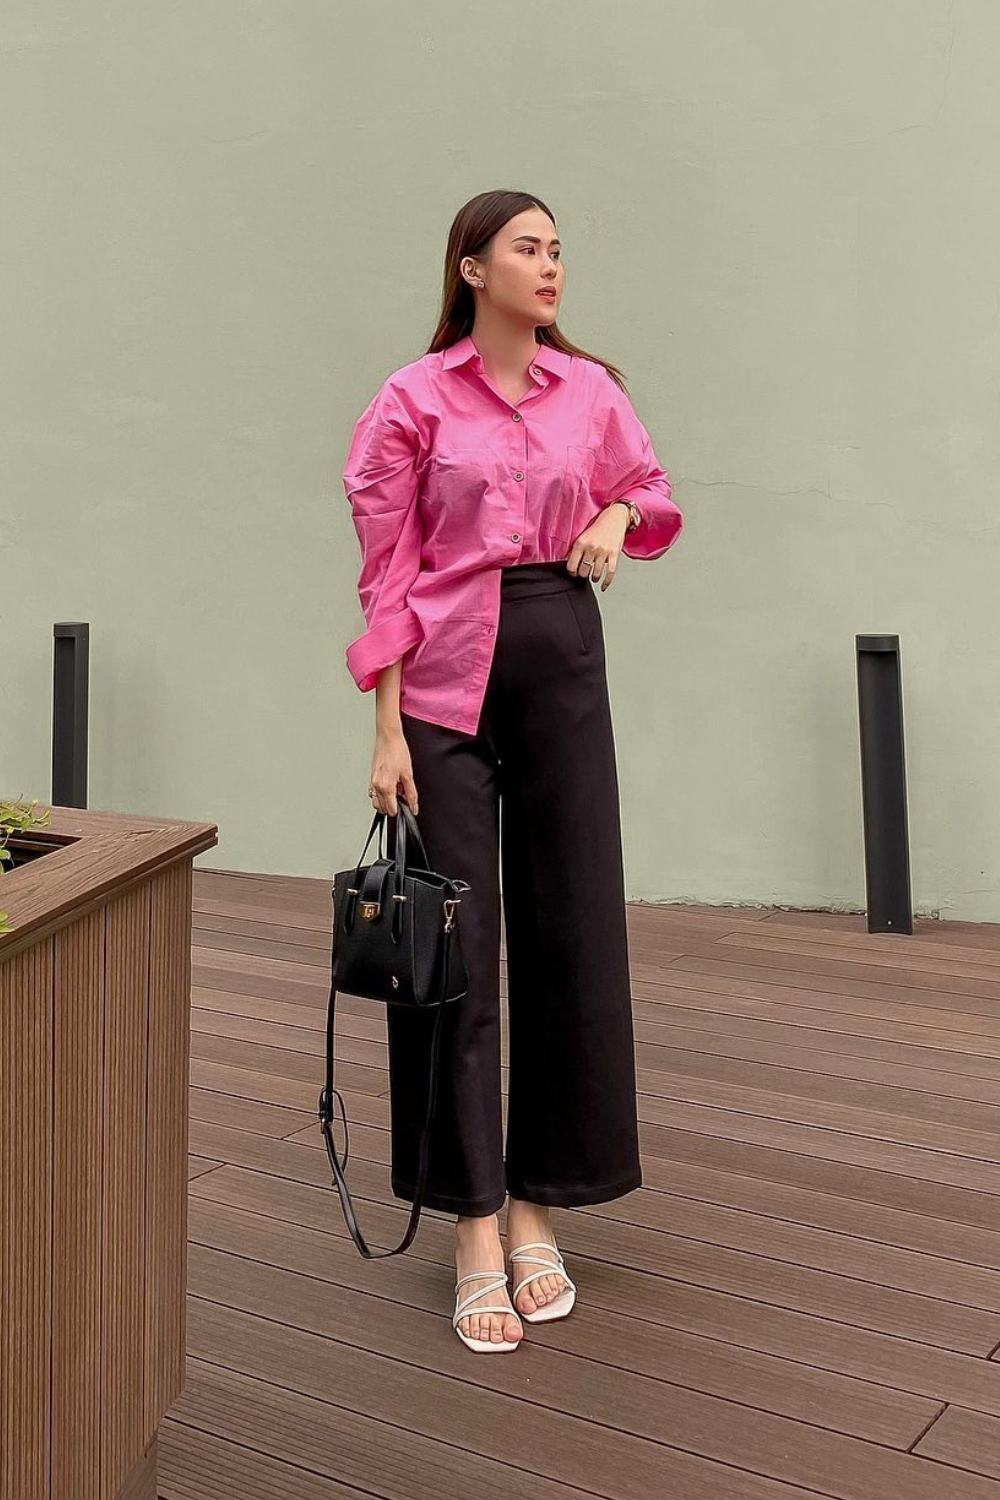 Classy Fuchsia button down shirt with Black Pants Outfit